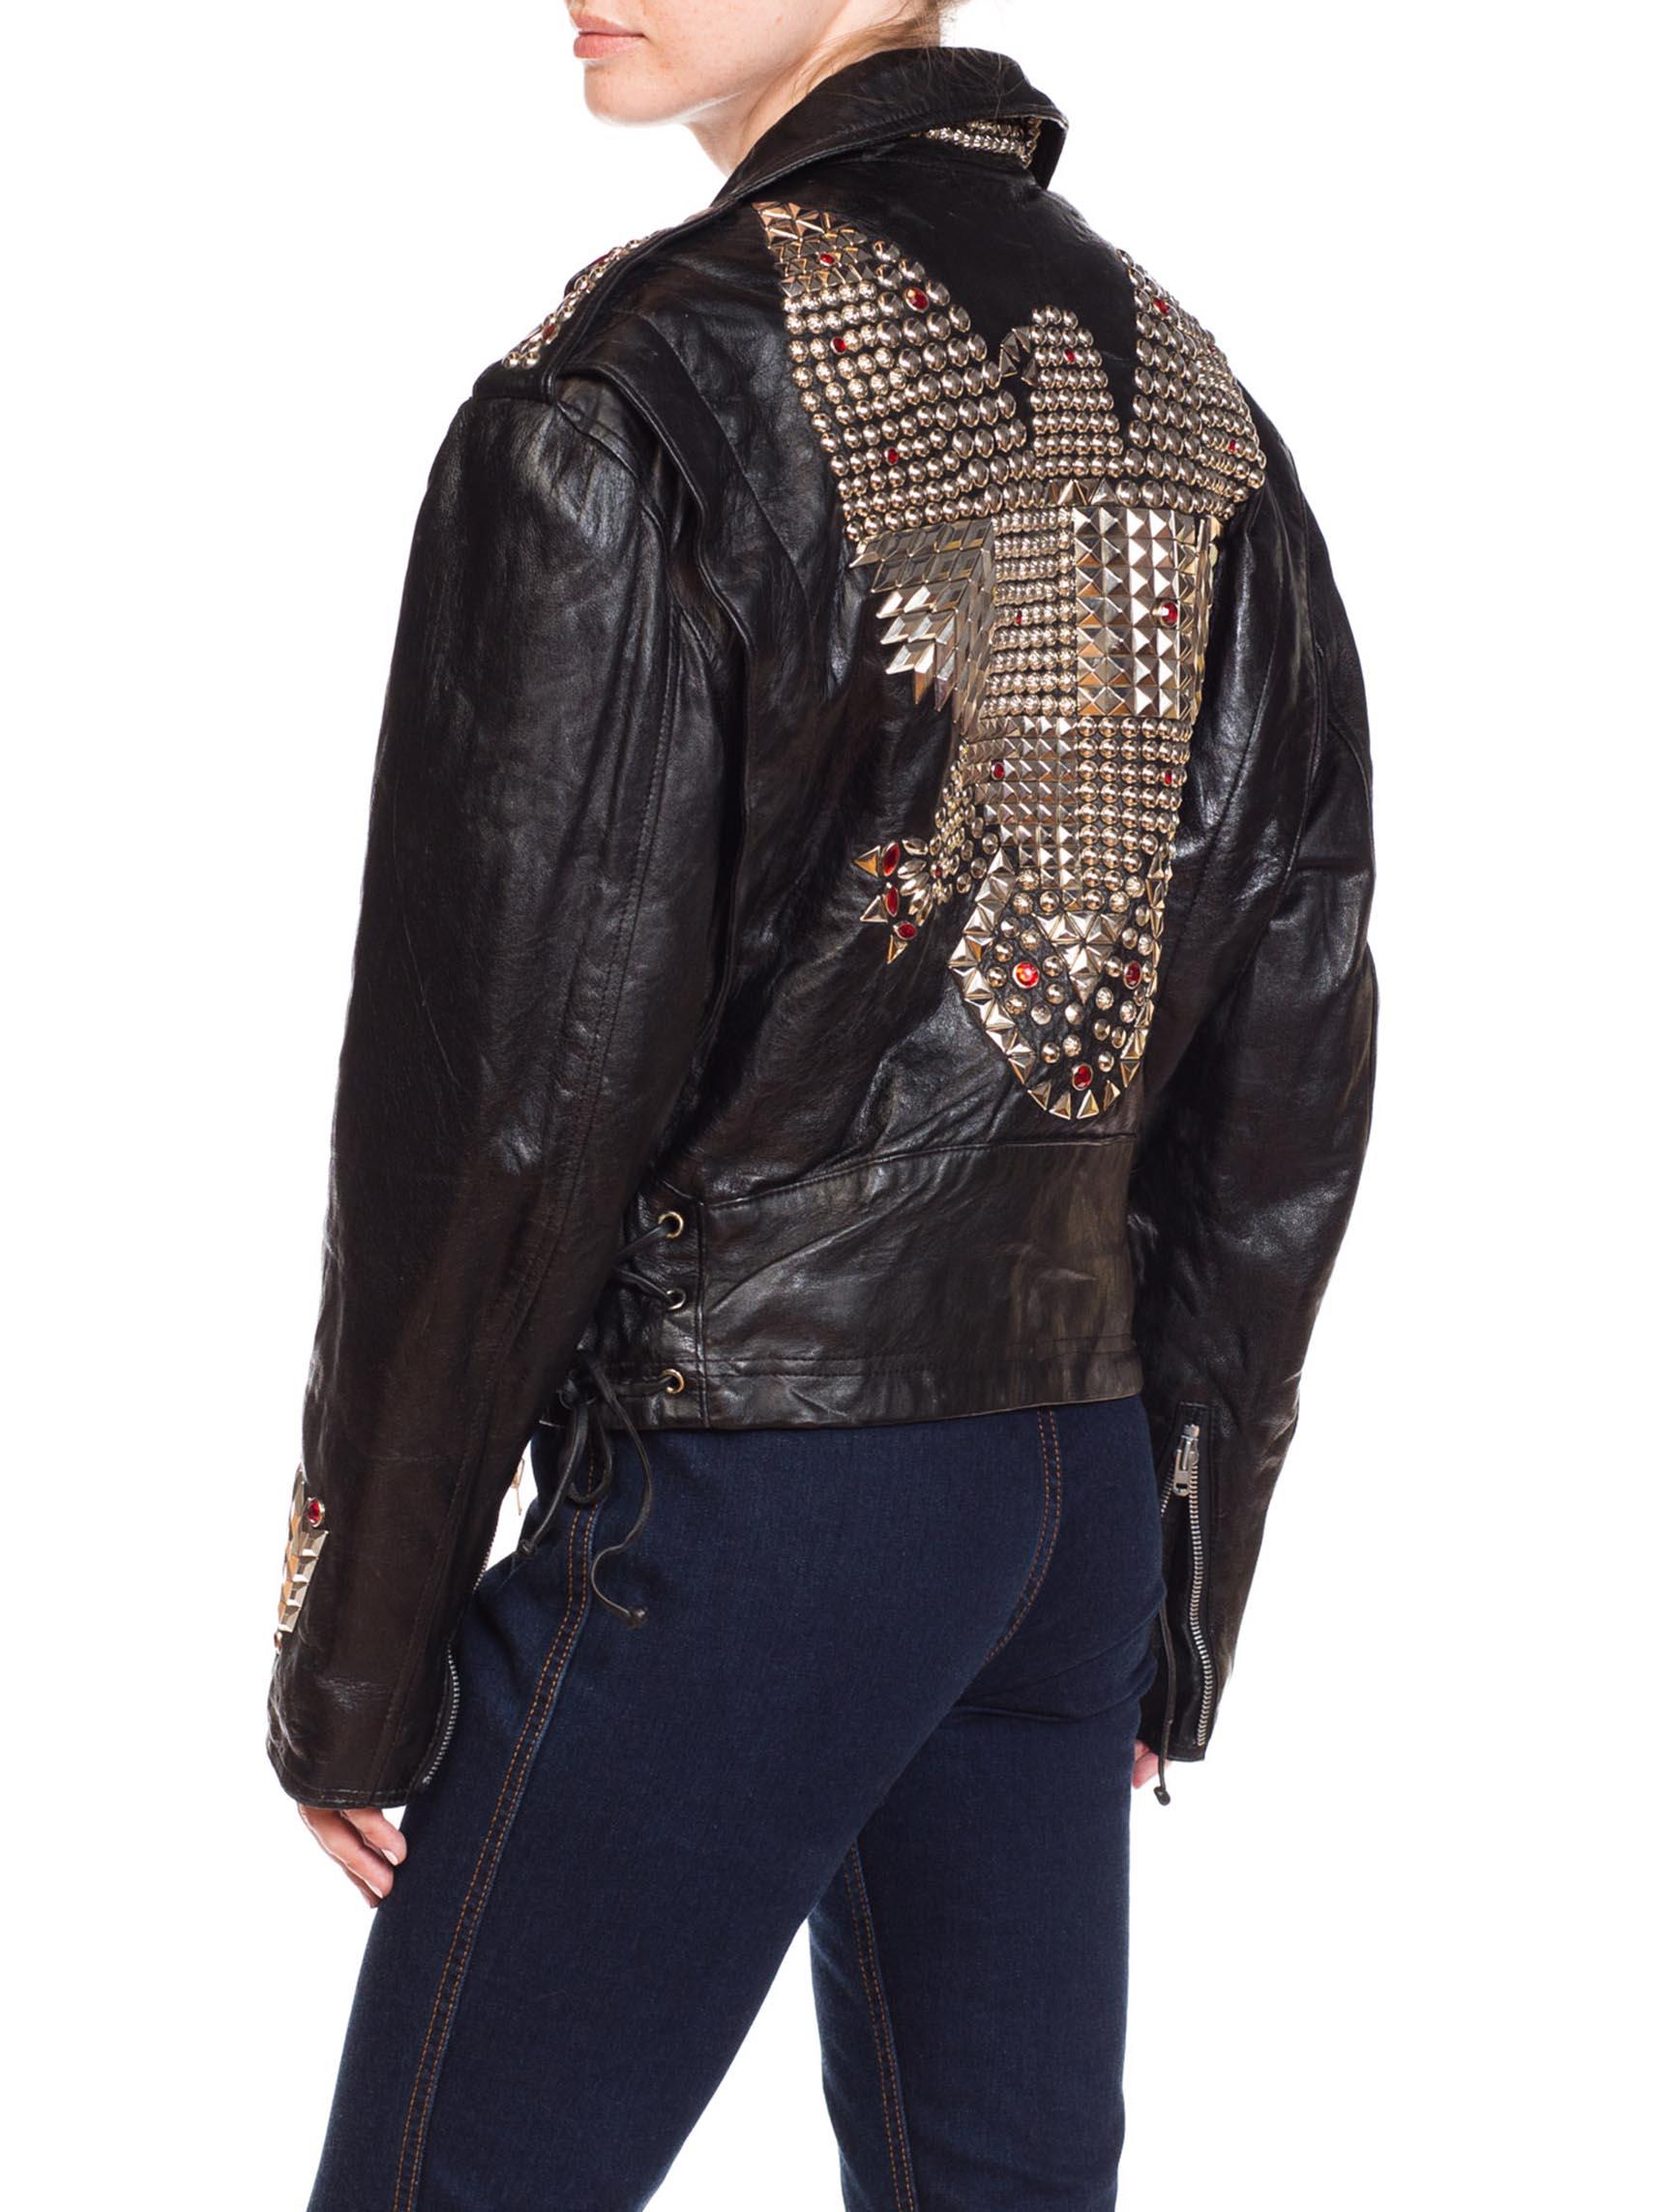 1990S JEFF HAMILTON Men's Studded Leather Biker Jacket With Crystals And Eagle In Excellent Condition For Sale In New York, NY